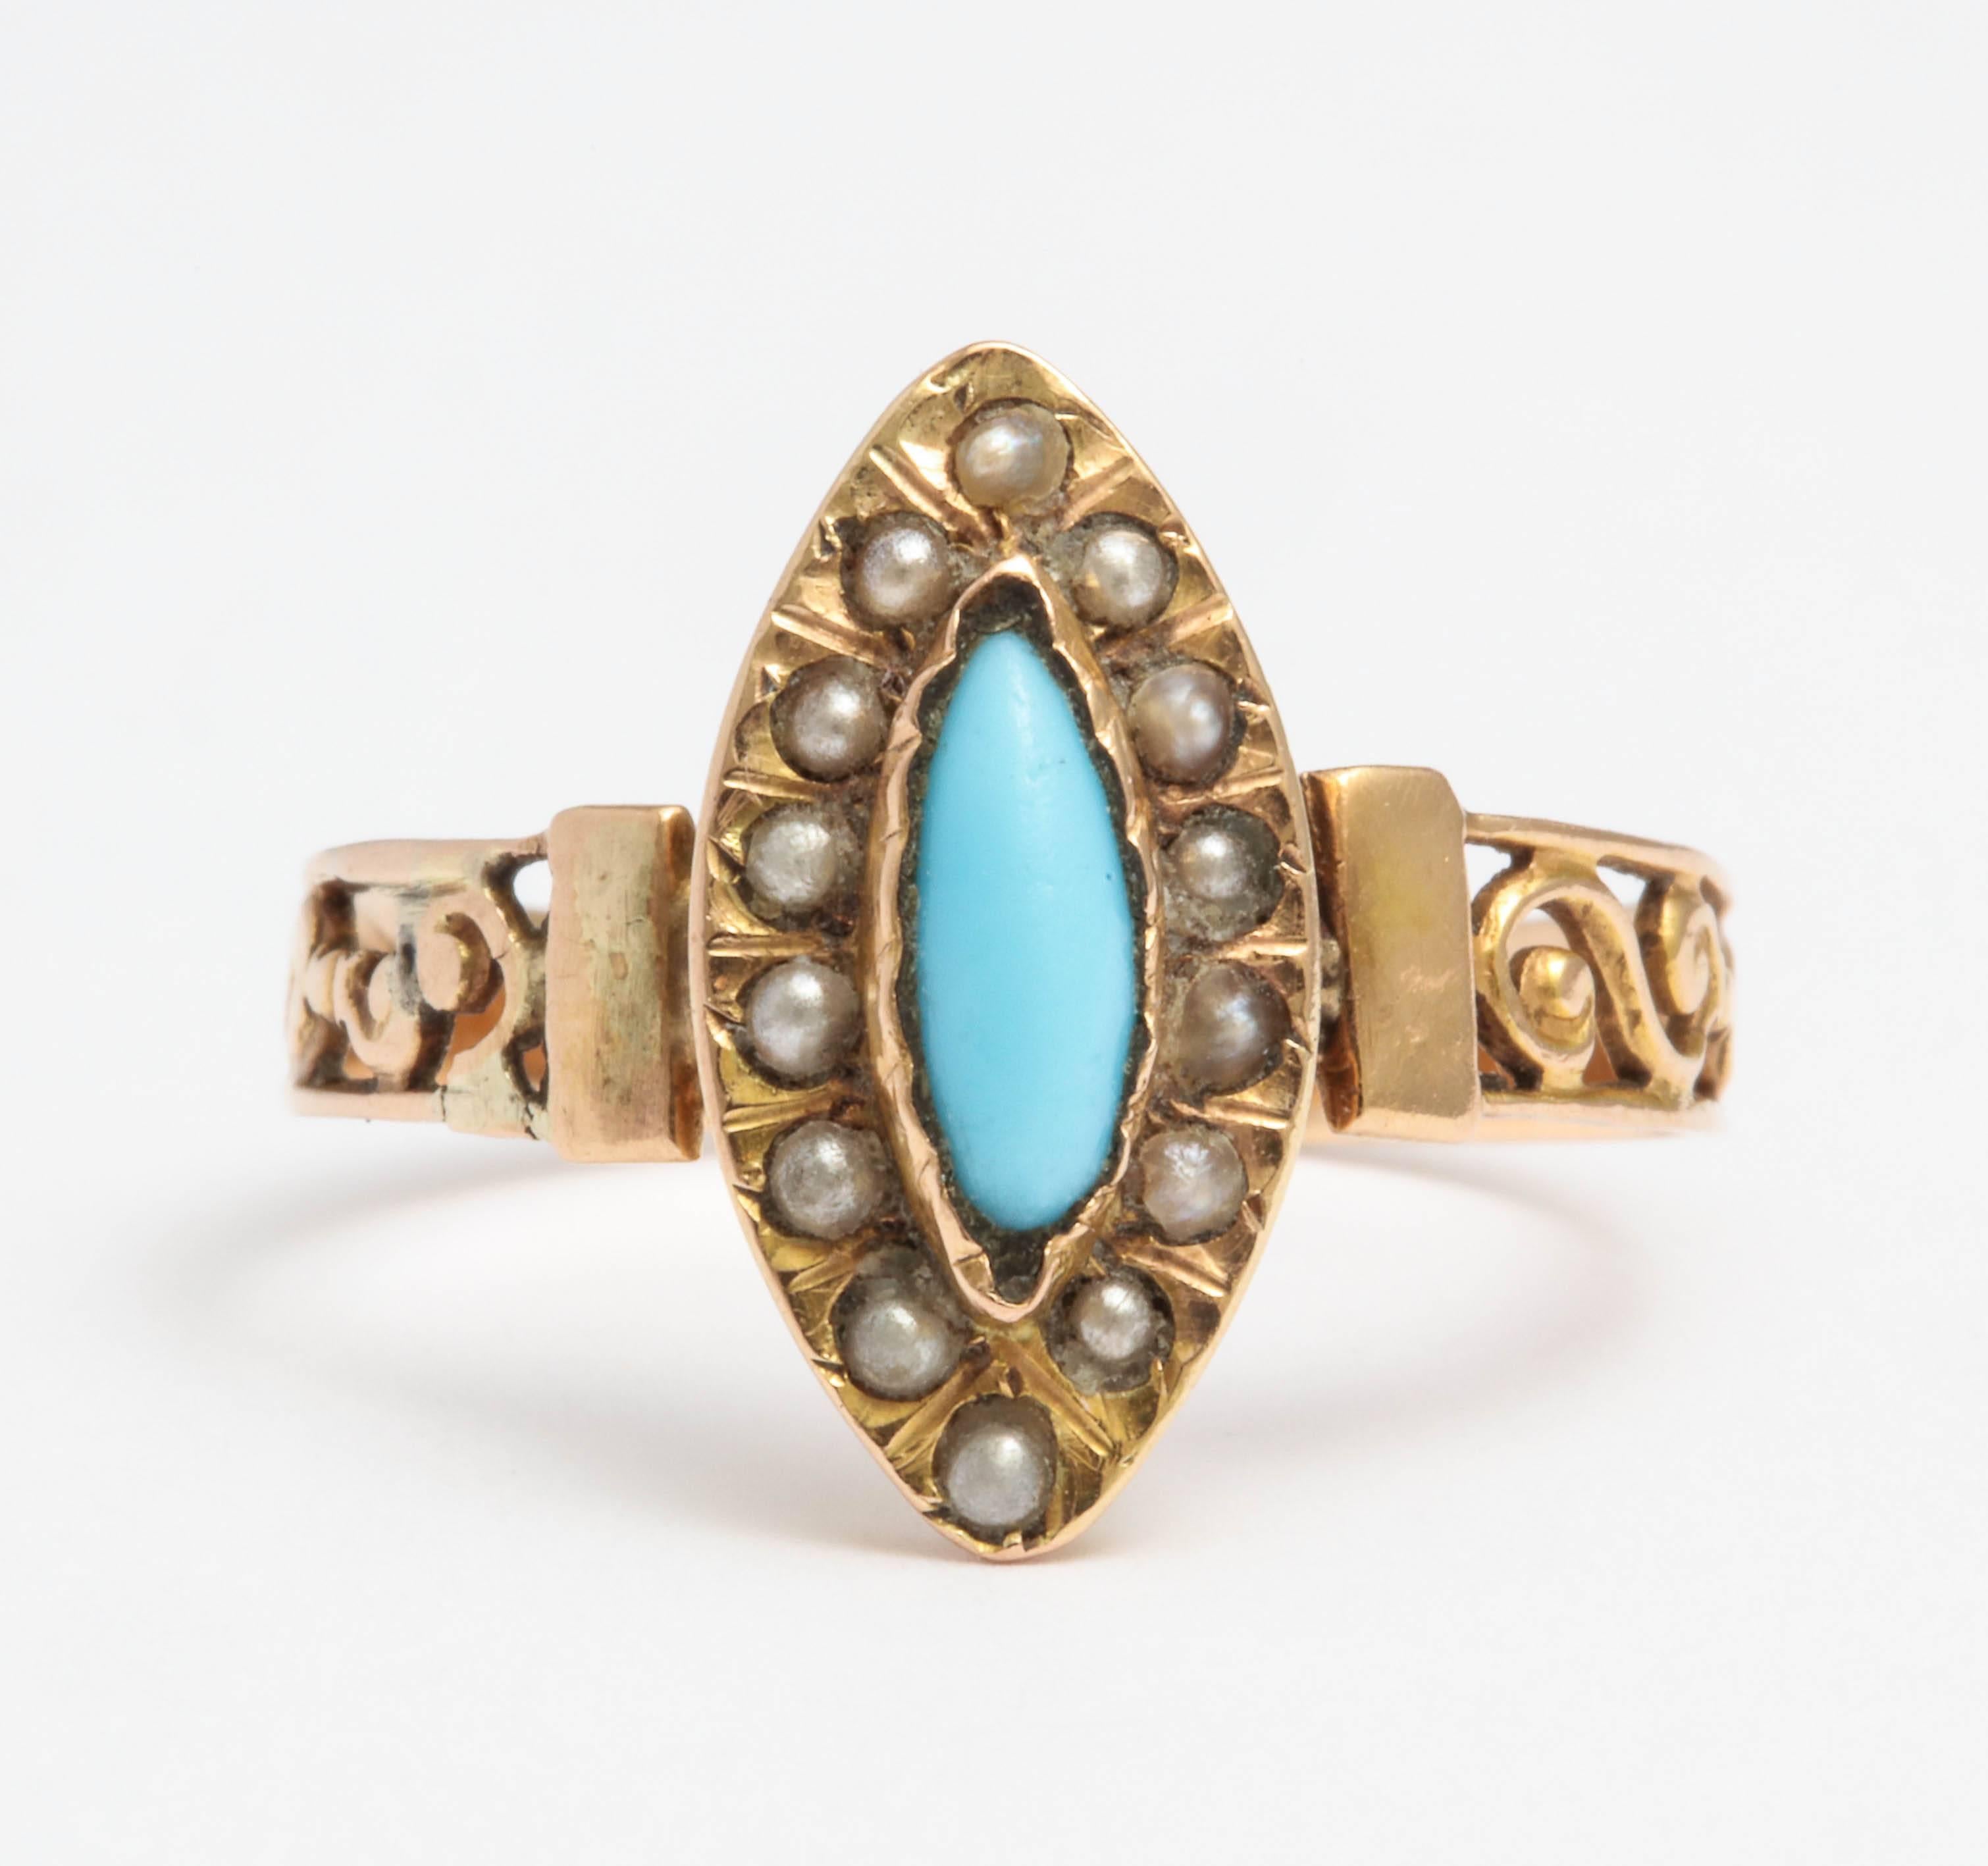 A beautiful French navette-shaped ring bezel-set with a oval cabochon turquoise surrounded by fourteen seed pearls, with openwork scrolling shoulders in 18k rose gold.

Paris, 19th century, with French hallmark

Size 6 1/2
